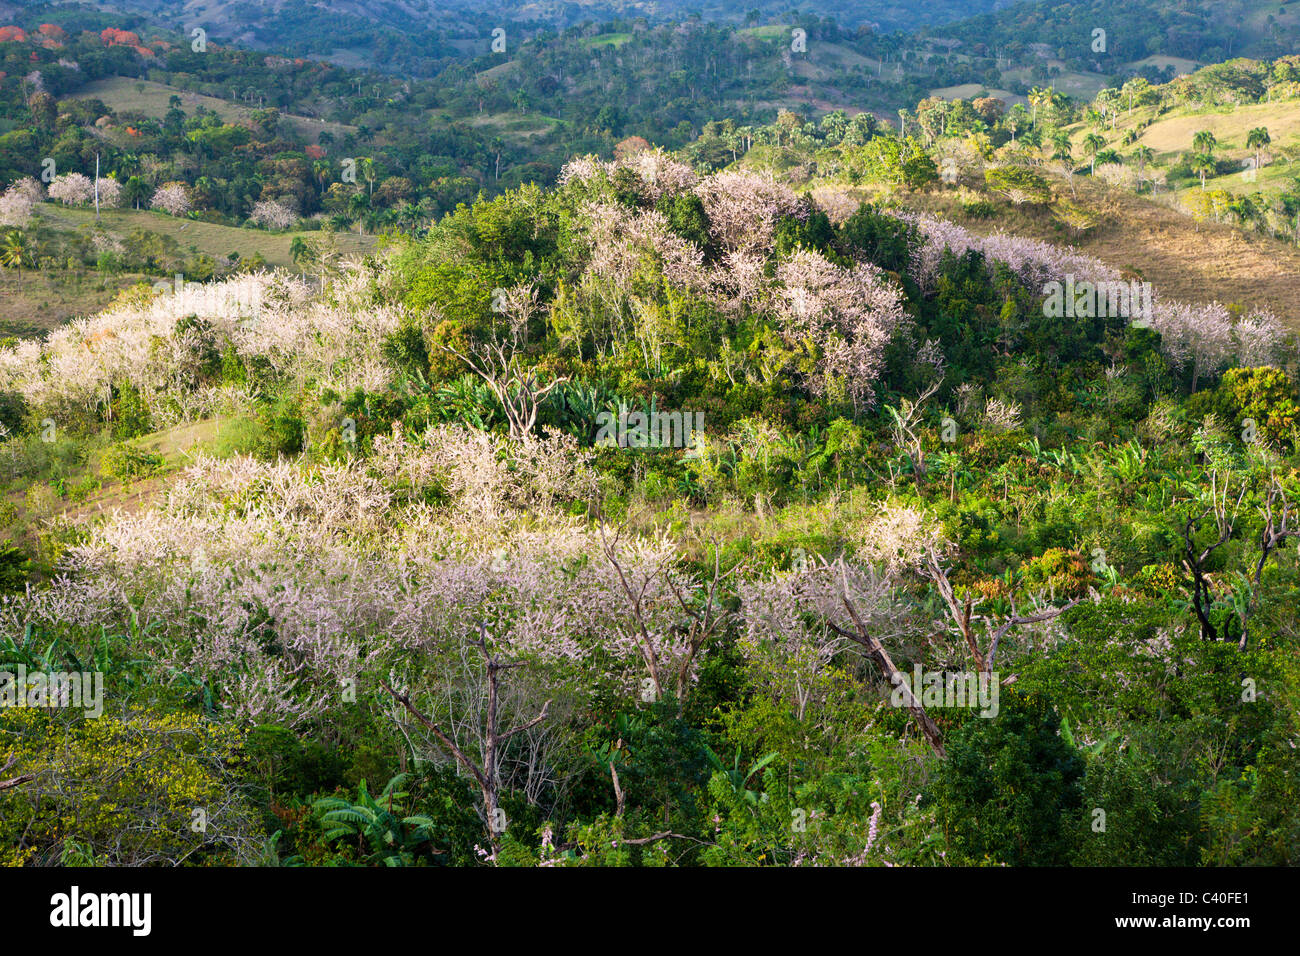 Hills in the Outback, Punta Rucia, Dominican Republic Stock Photo